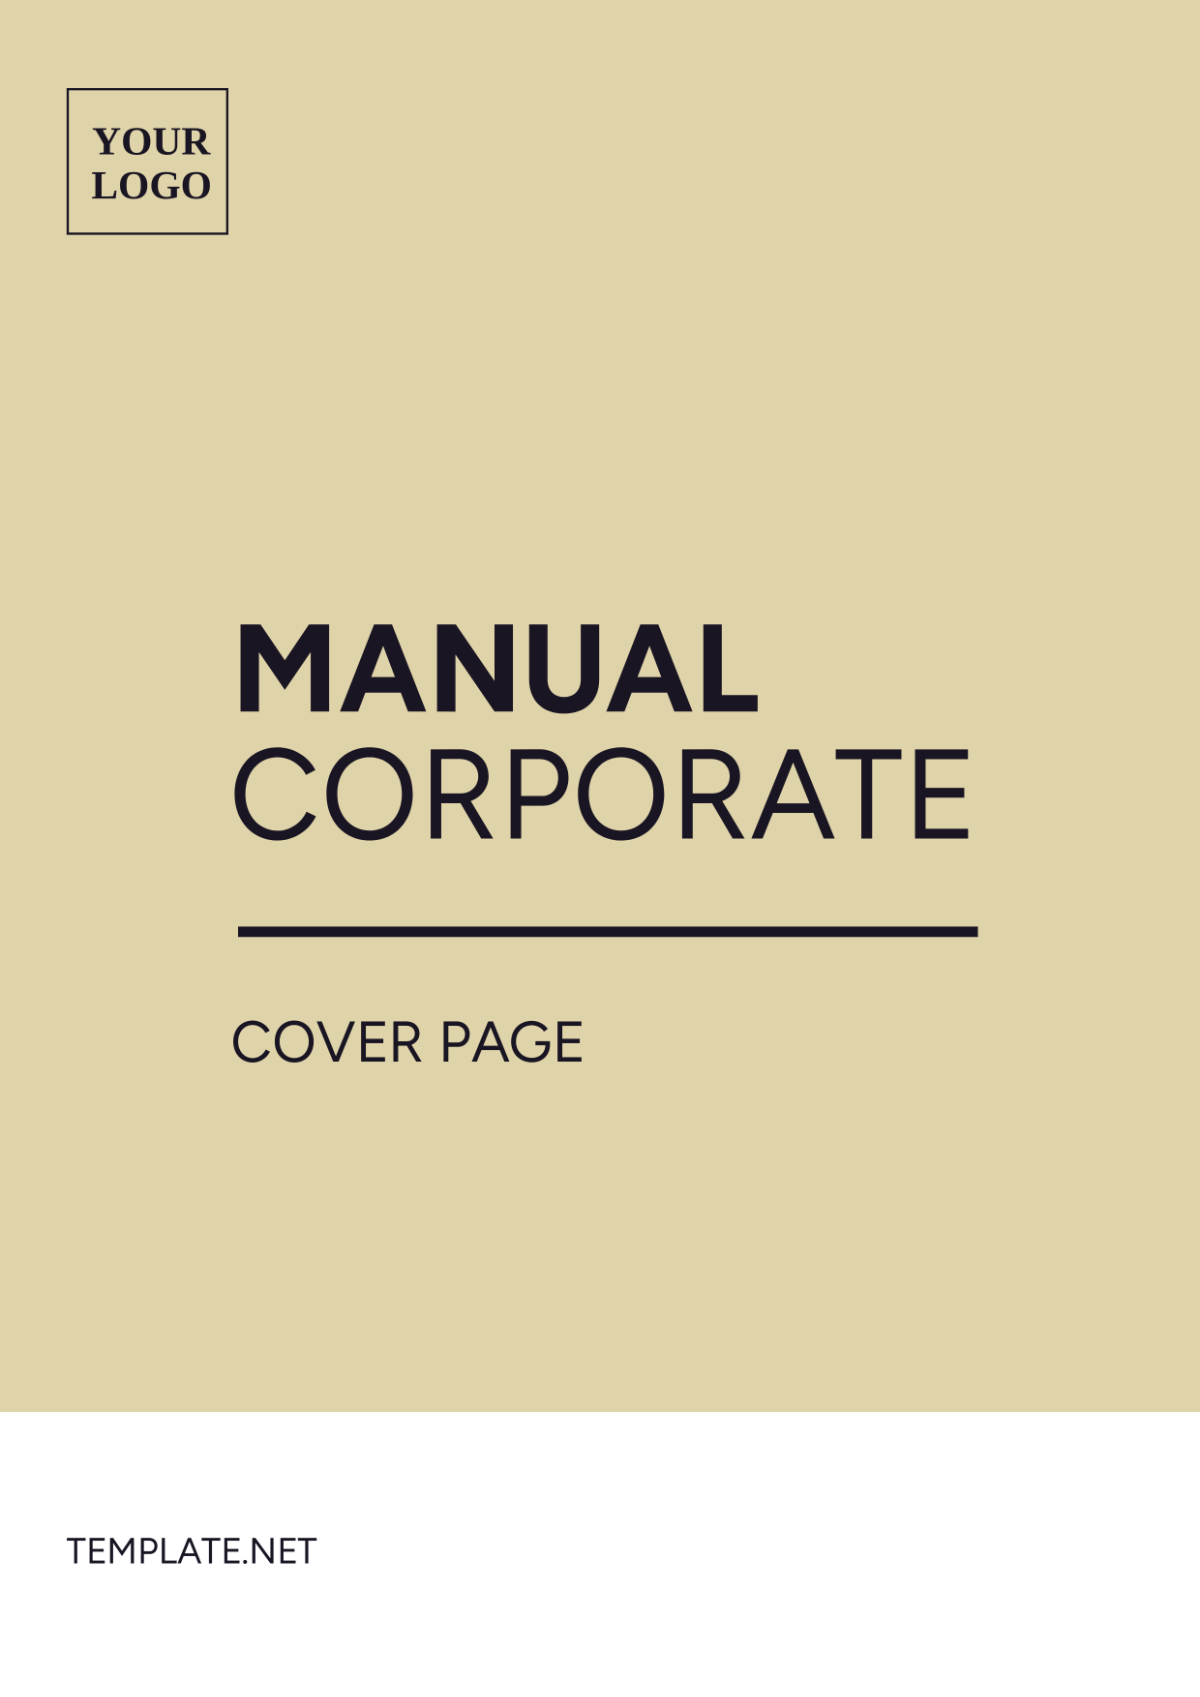 Manual Corporate Cover Page Template